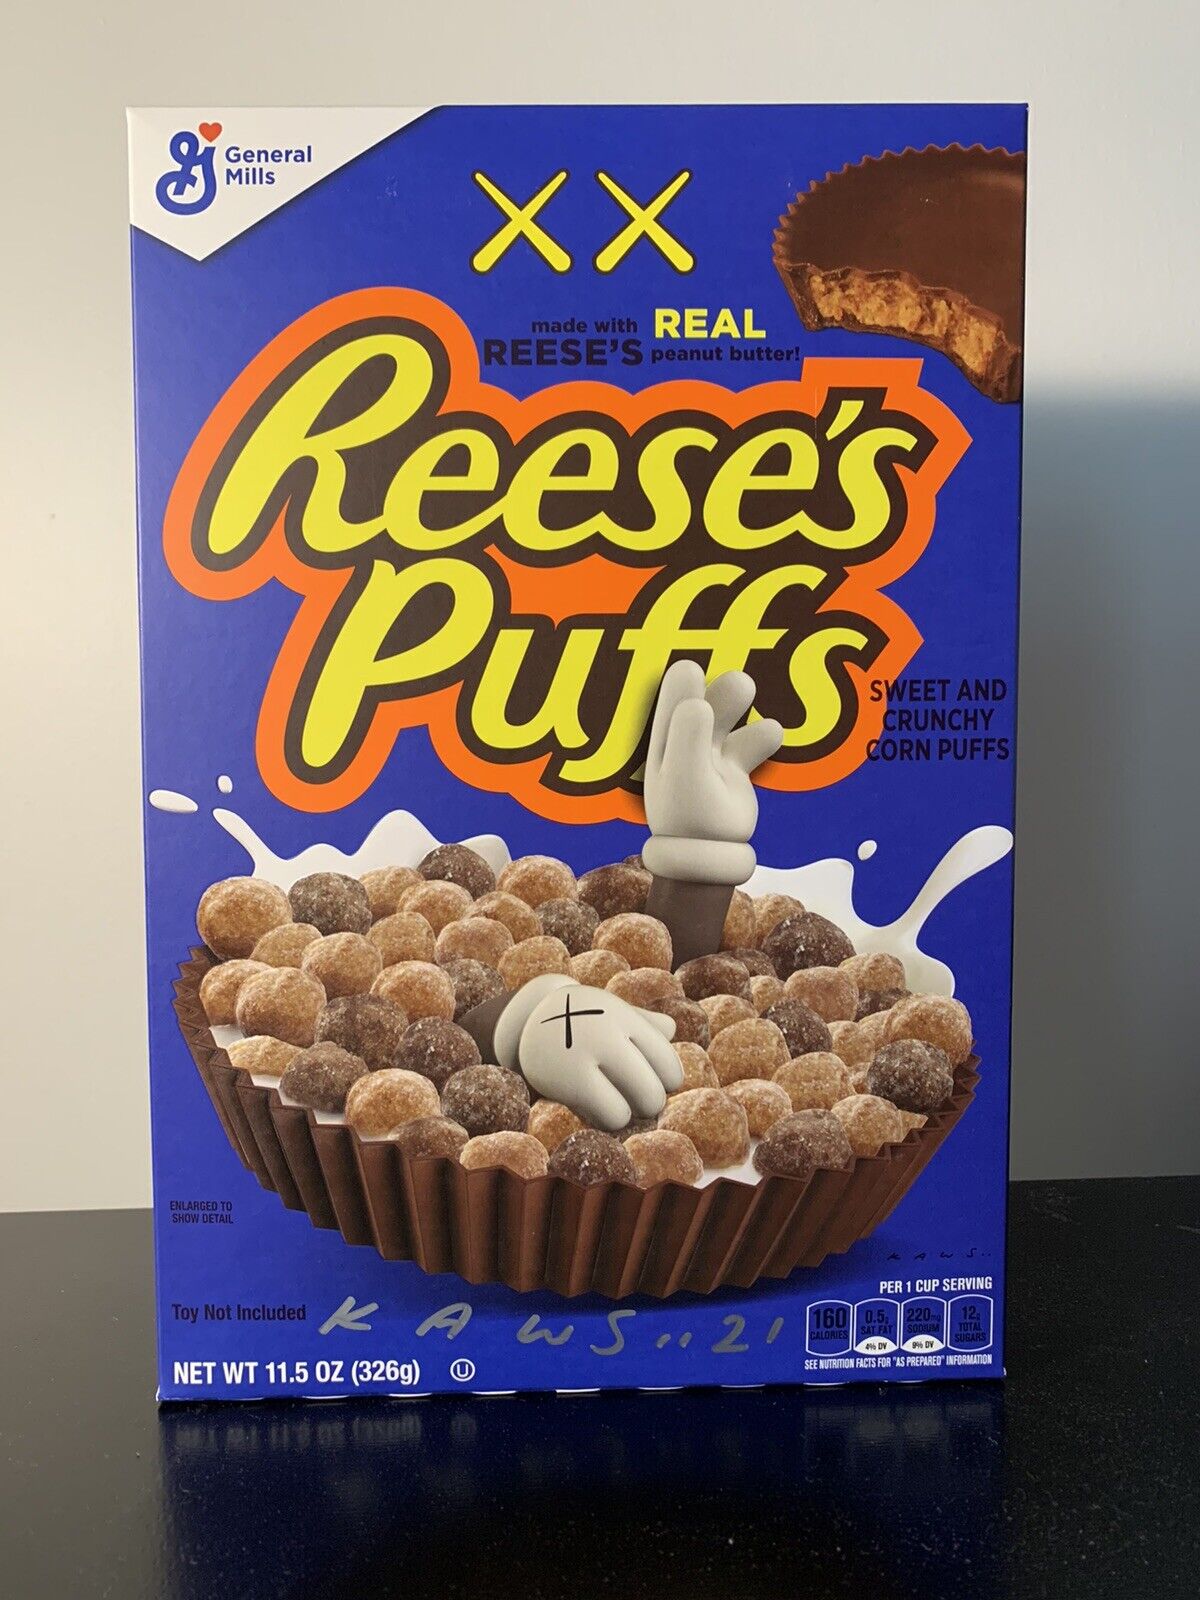 Signed by Artist KAWS (1 of 30)  - Limited Edition KAWS Reeses Puffs Cereal Box